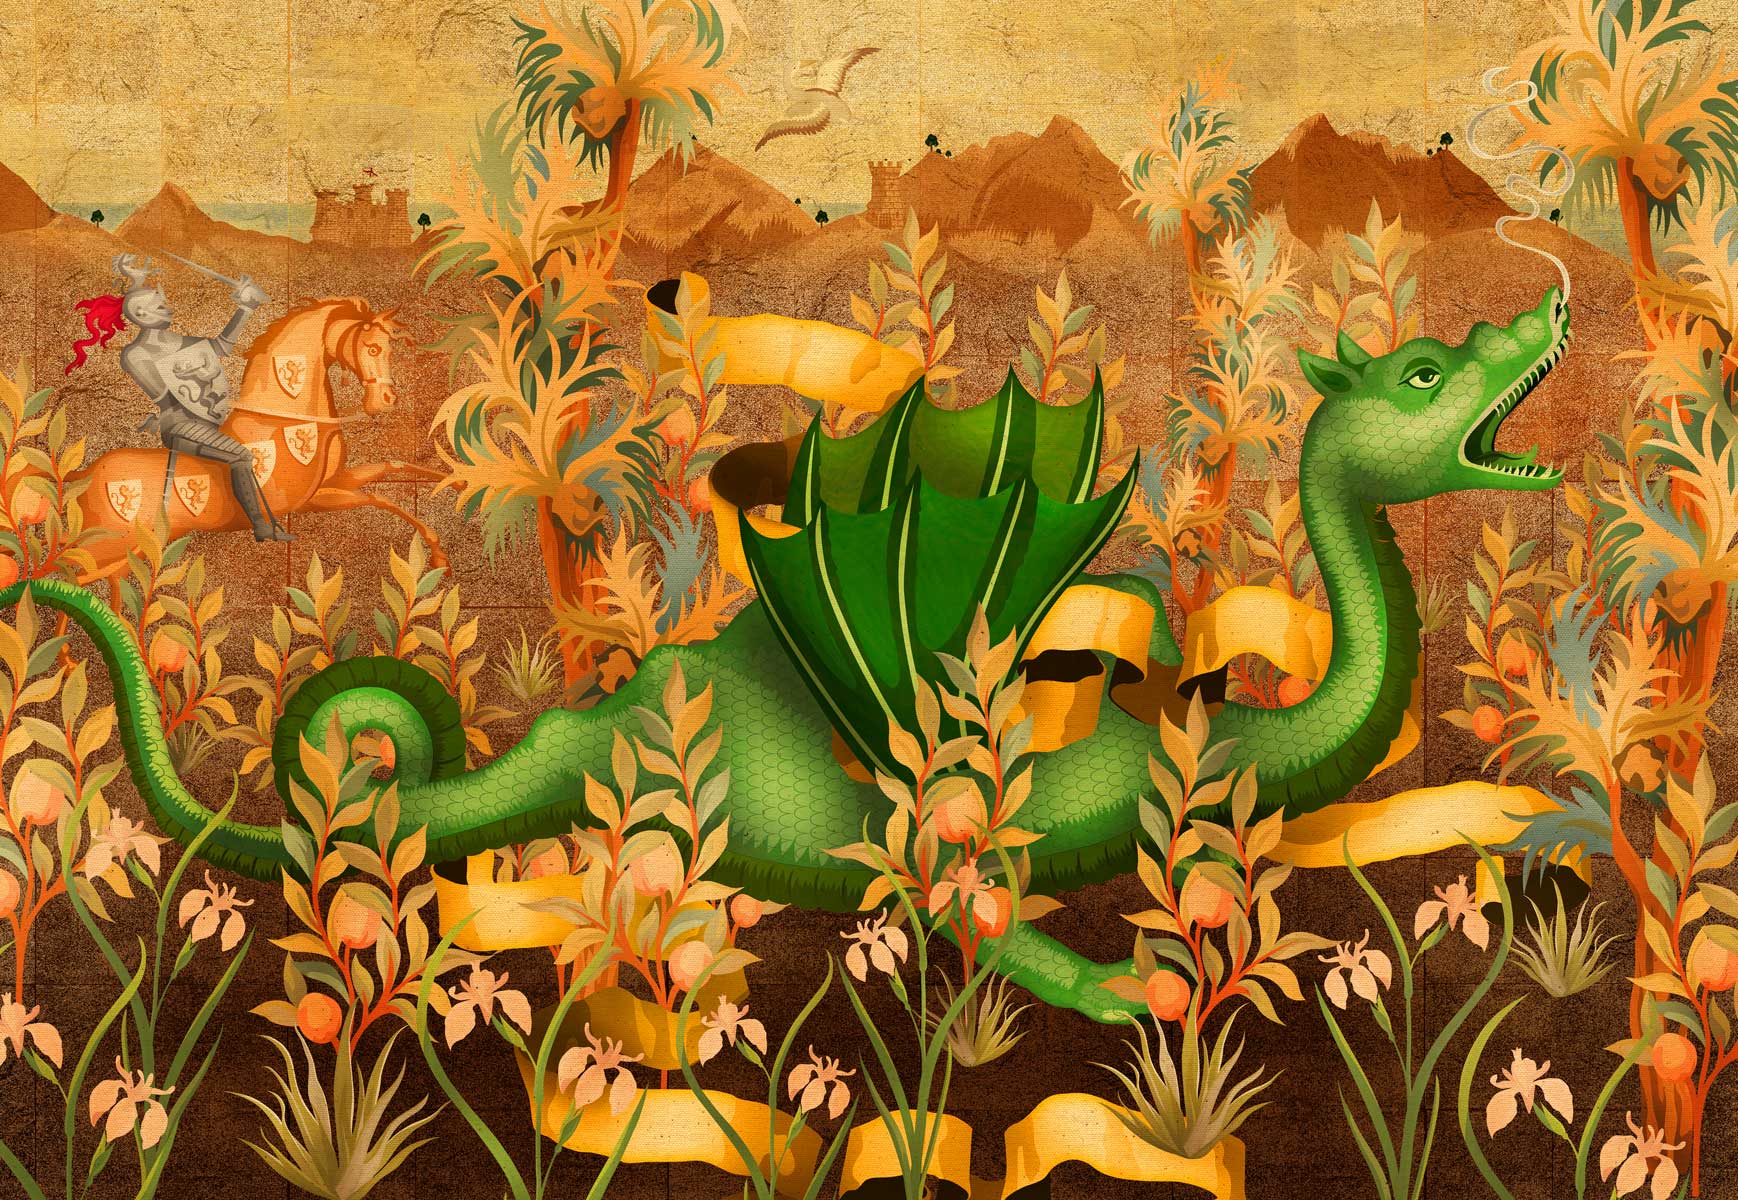 Dragon feature artwork in the Ivy Windsor Tapestry room